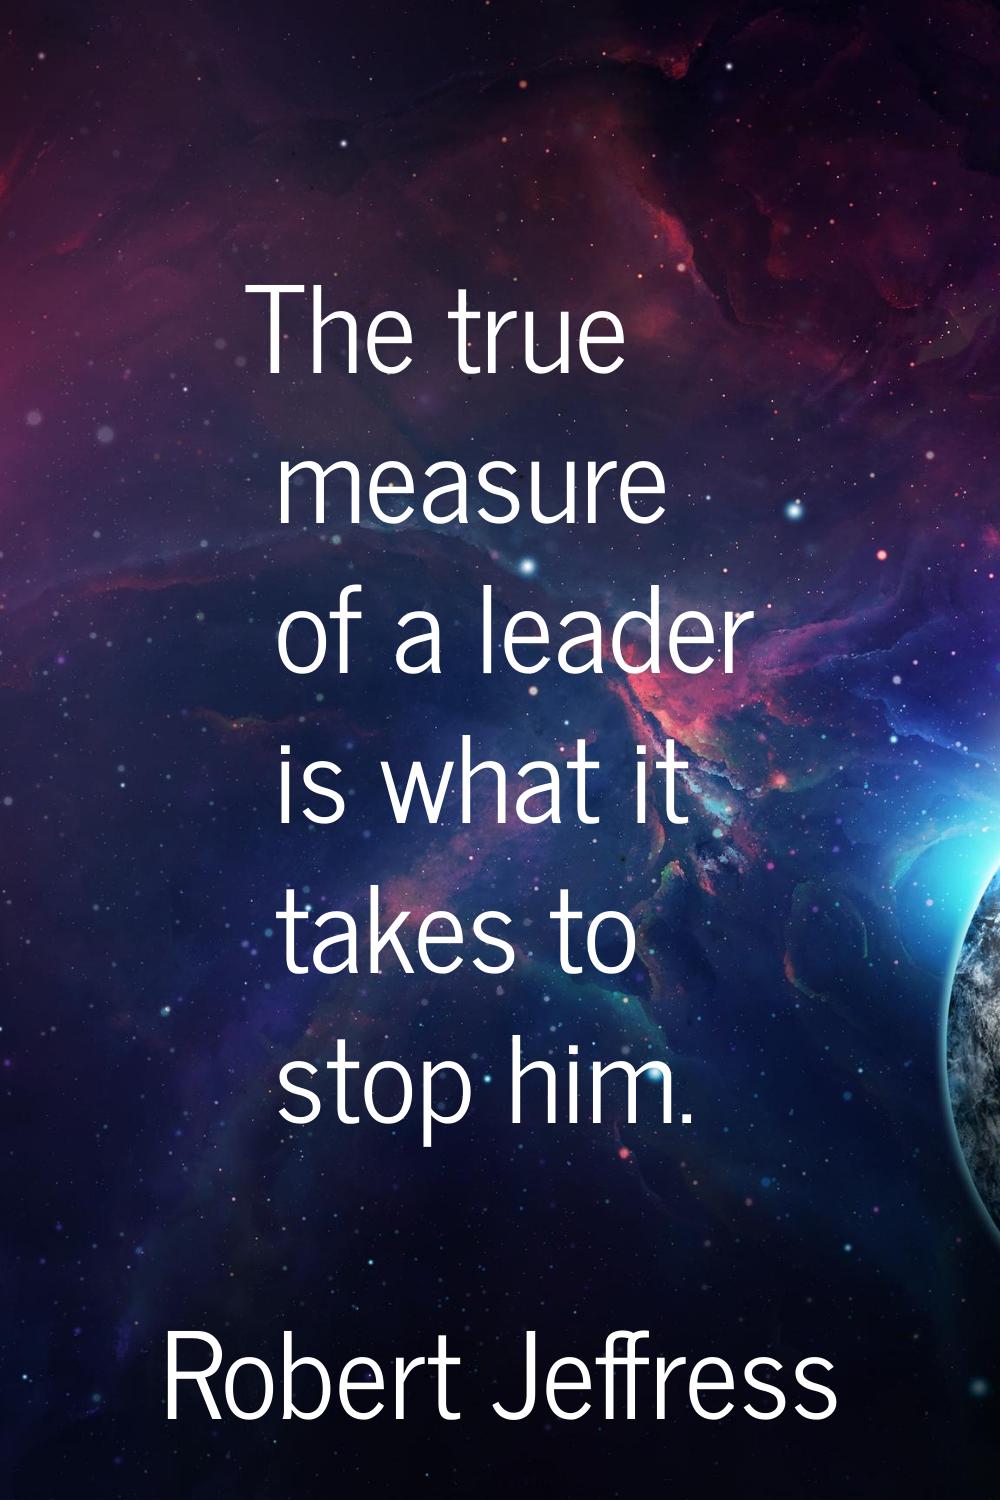 The true measure of a leader is what it takes to stop him.